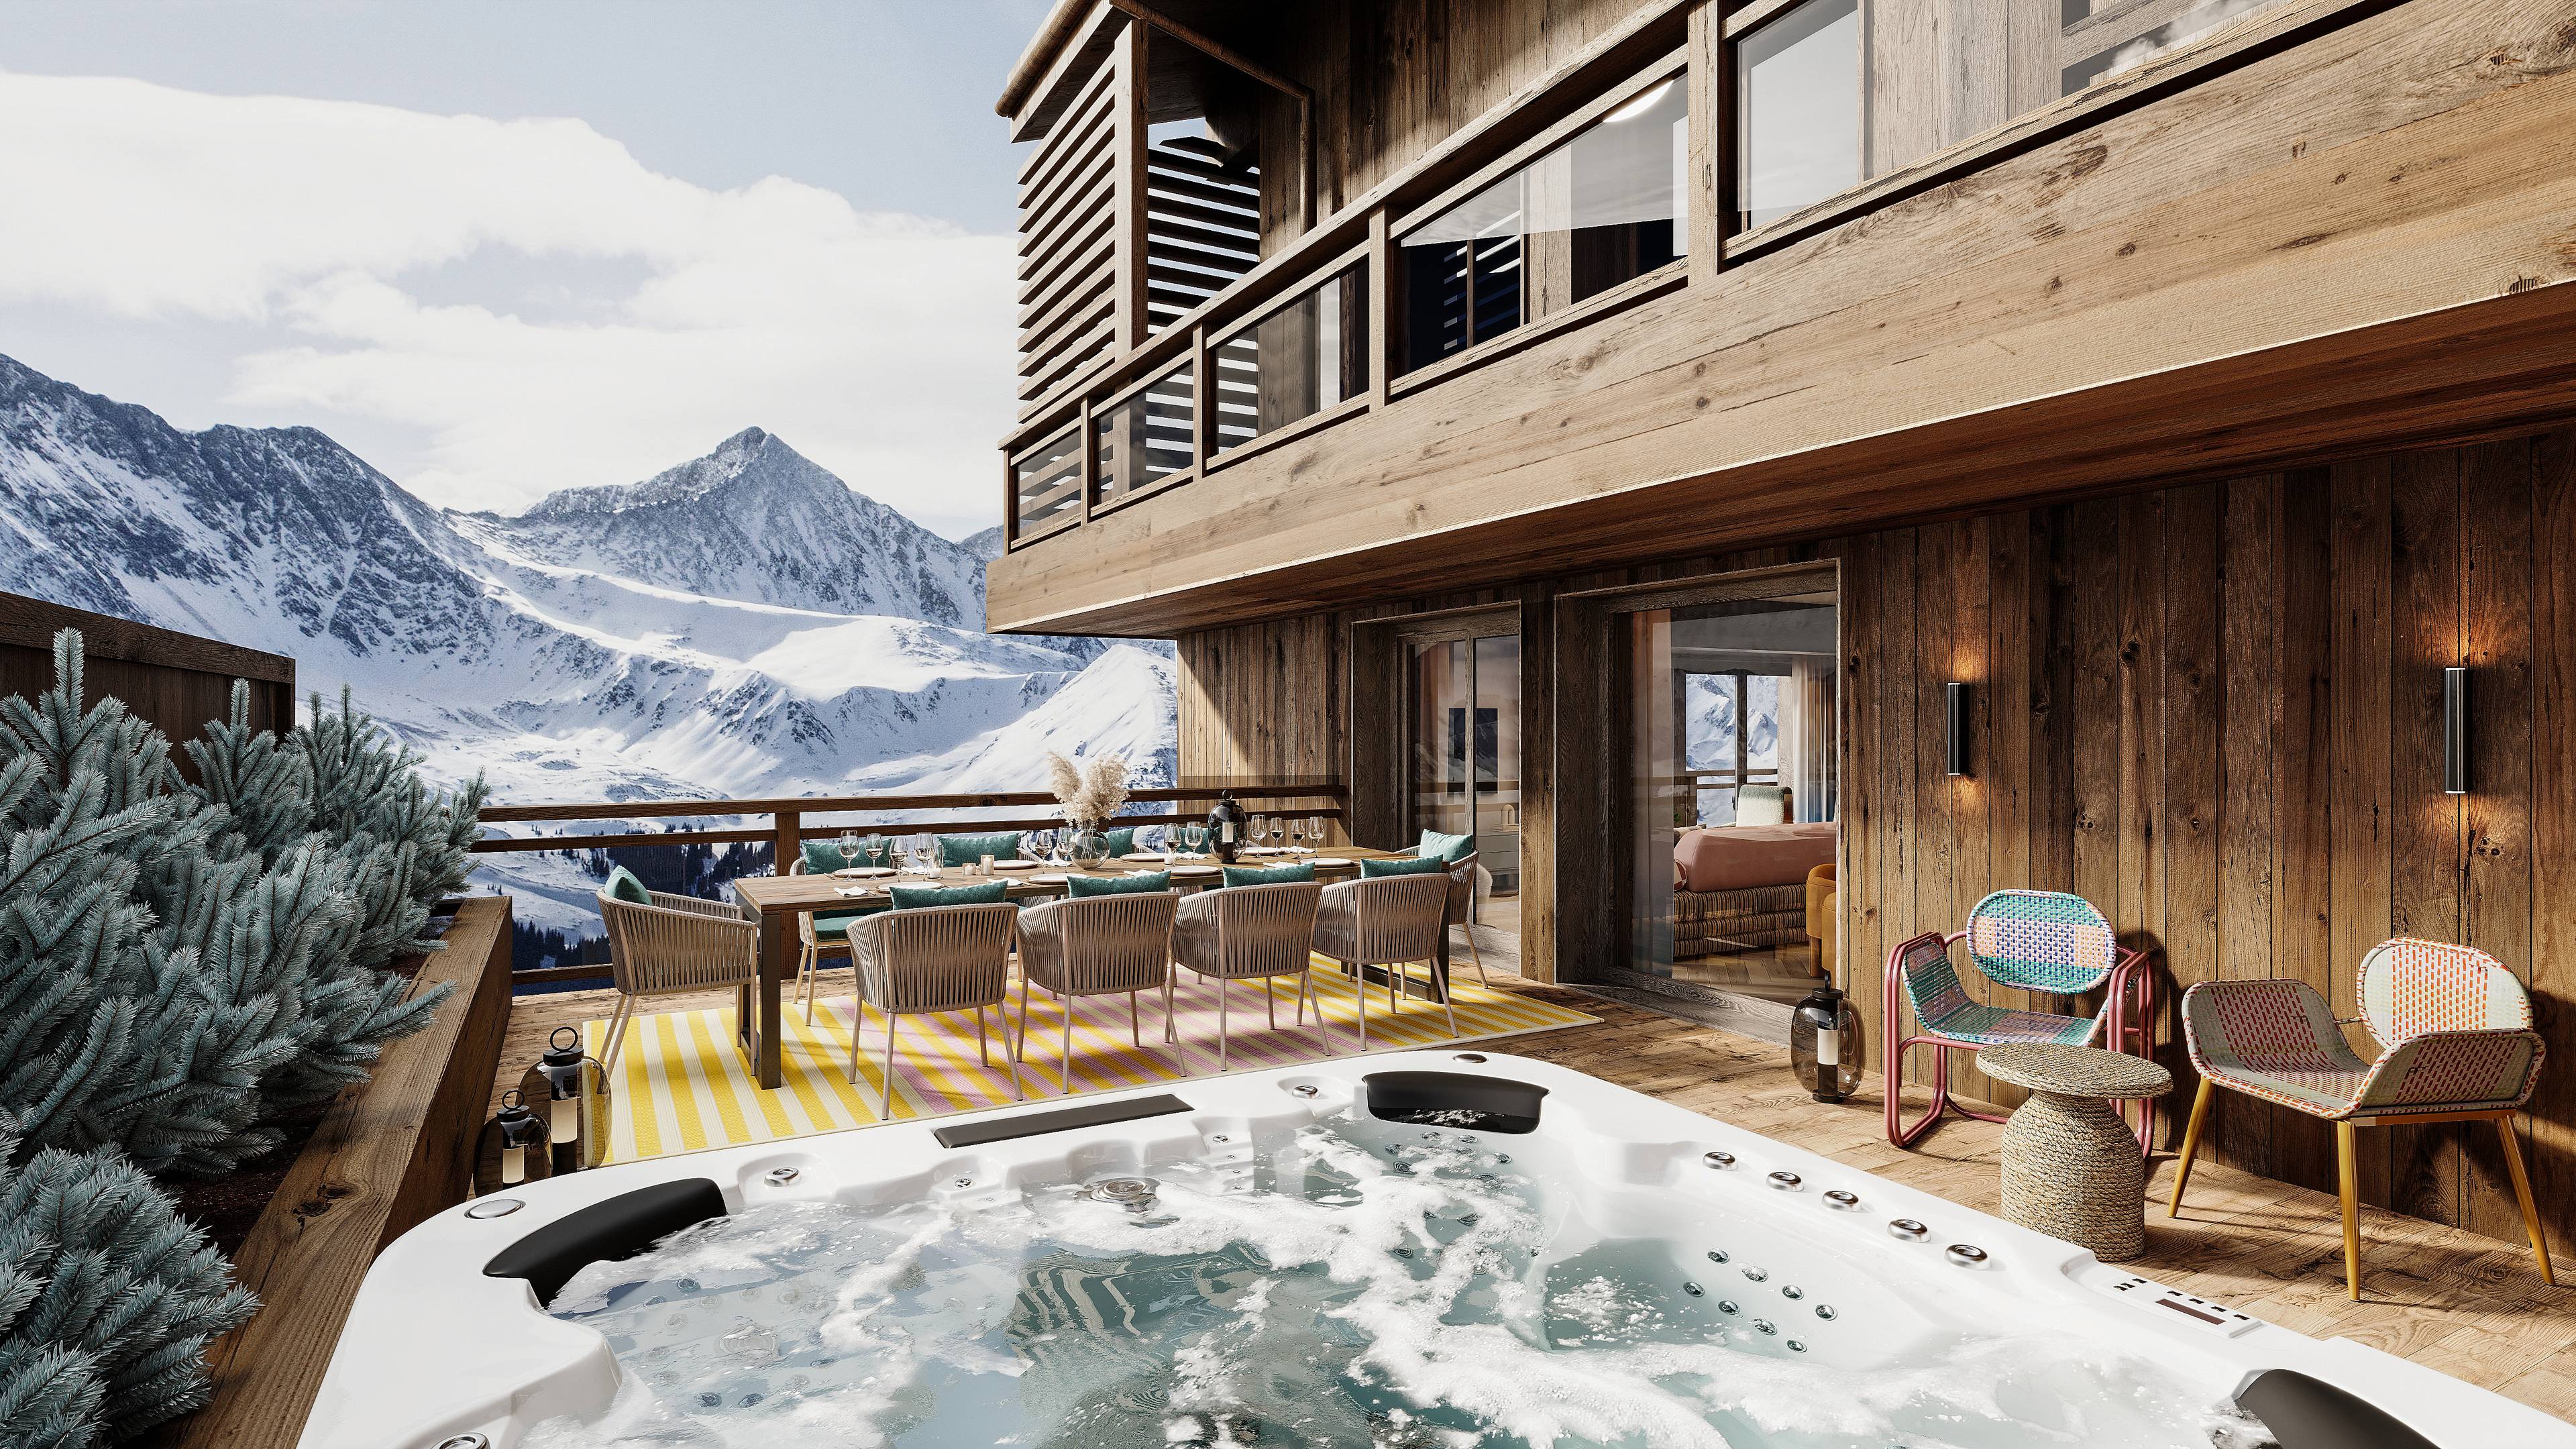 Steps From The Slopes: Experience The Epitome of Alpine Luxury in Courchevel, France